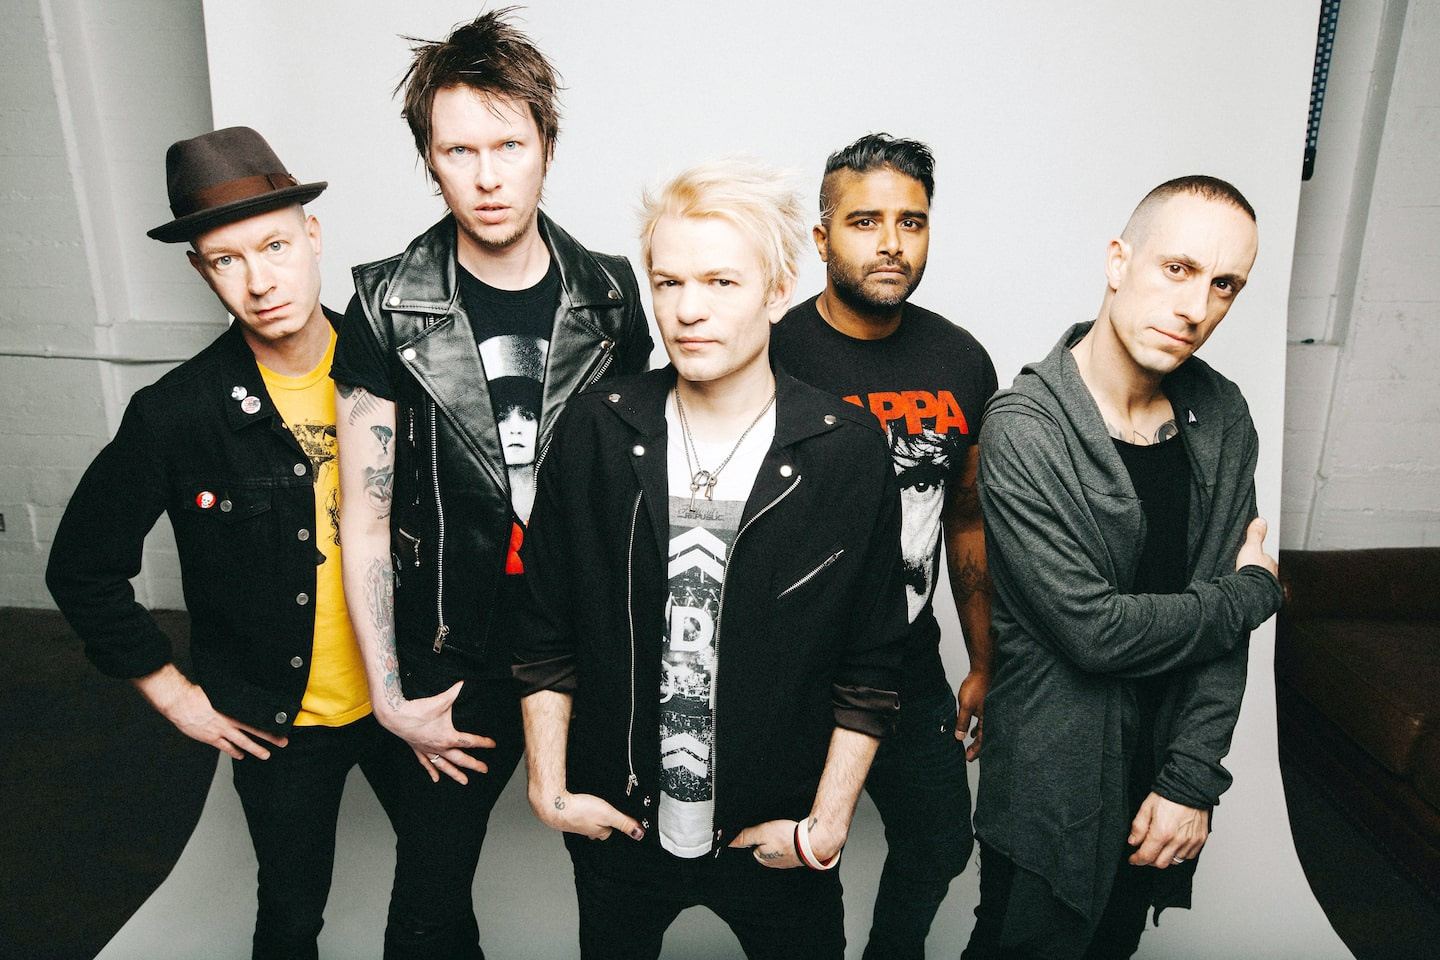 SUM 41 at the FEQ: the pioneers of pop punk turn up